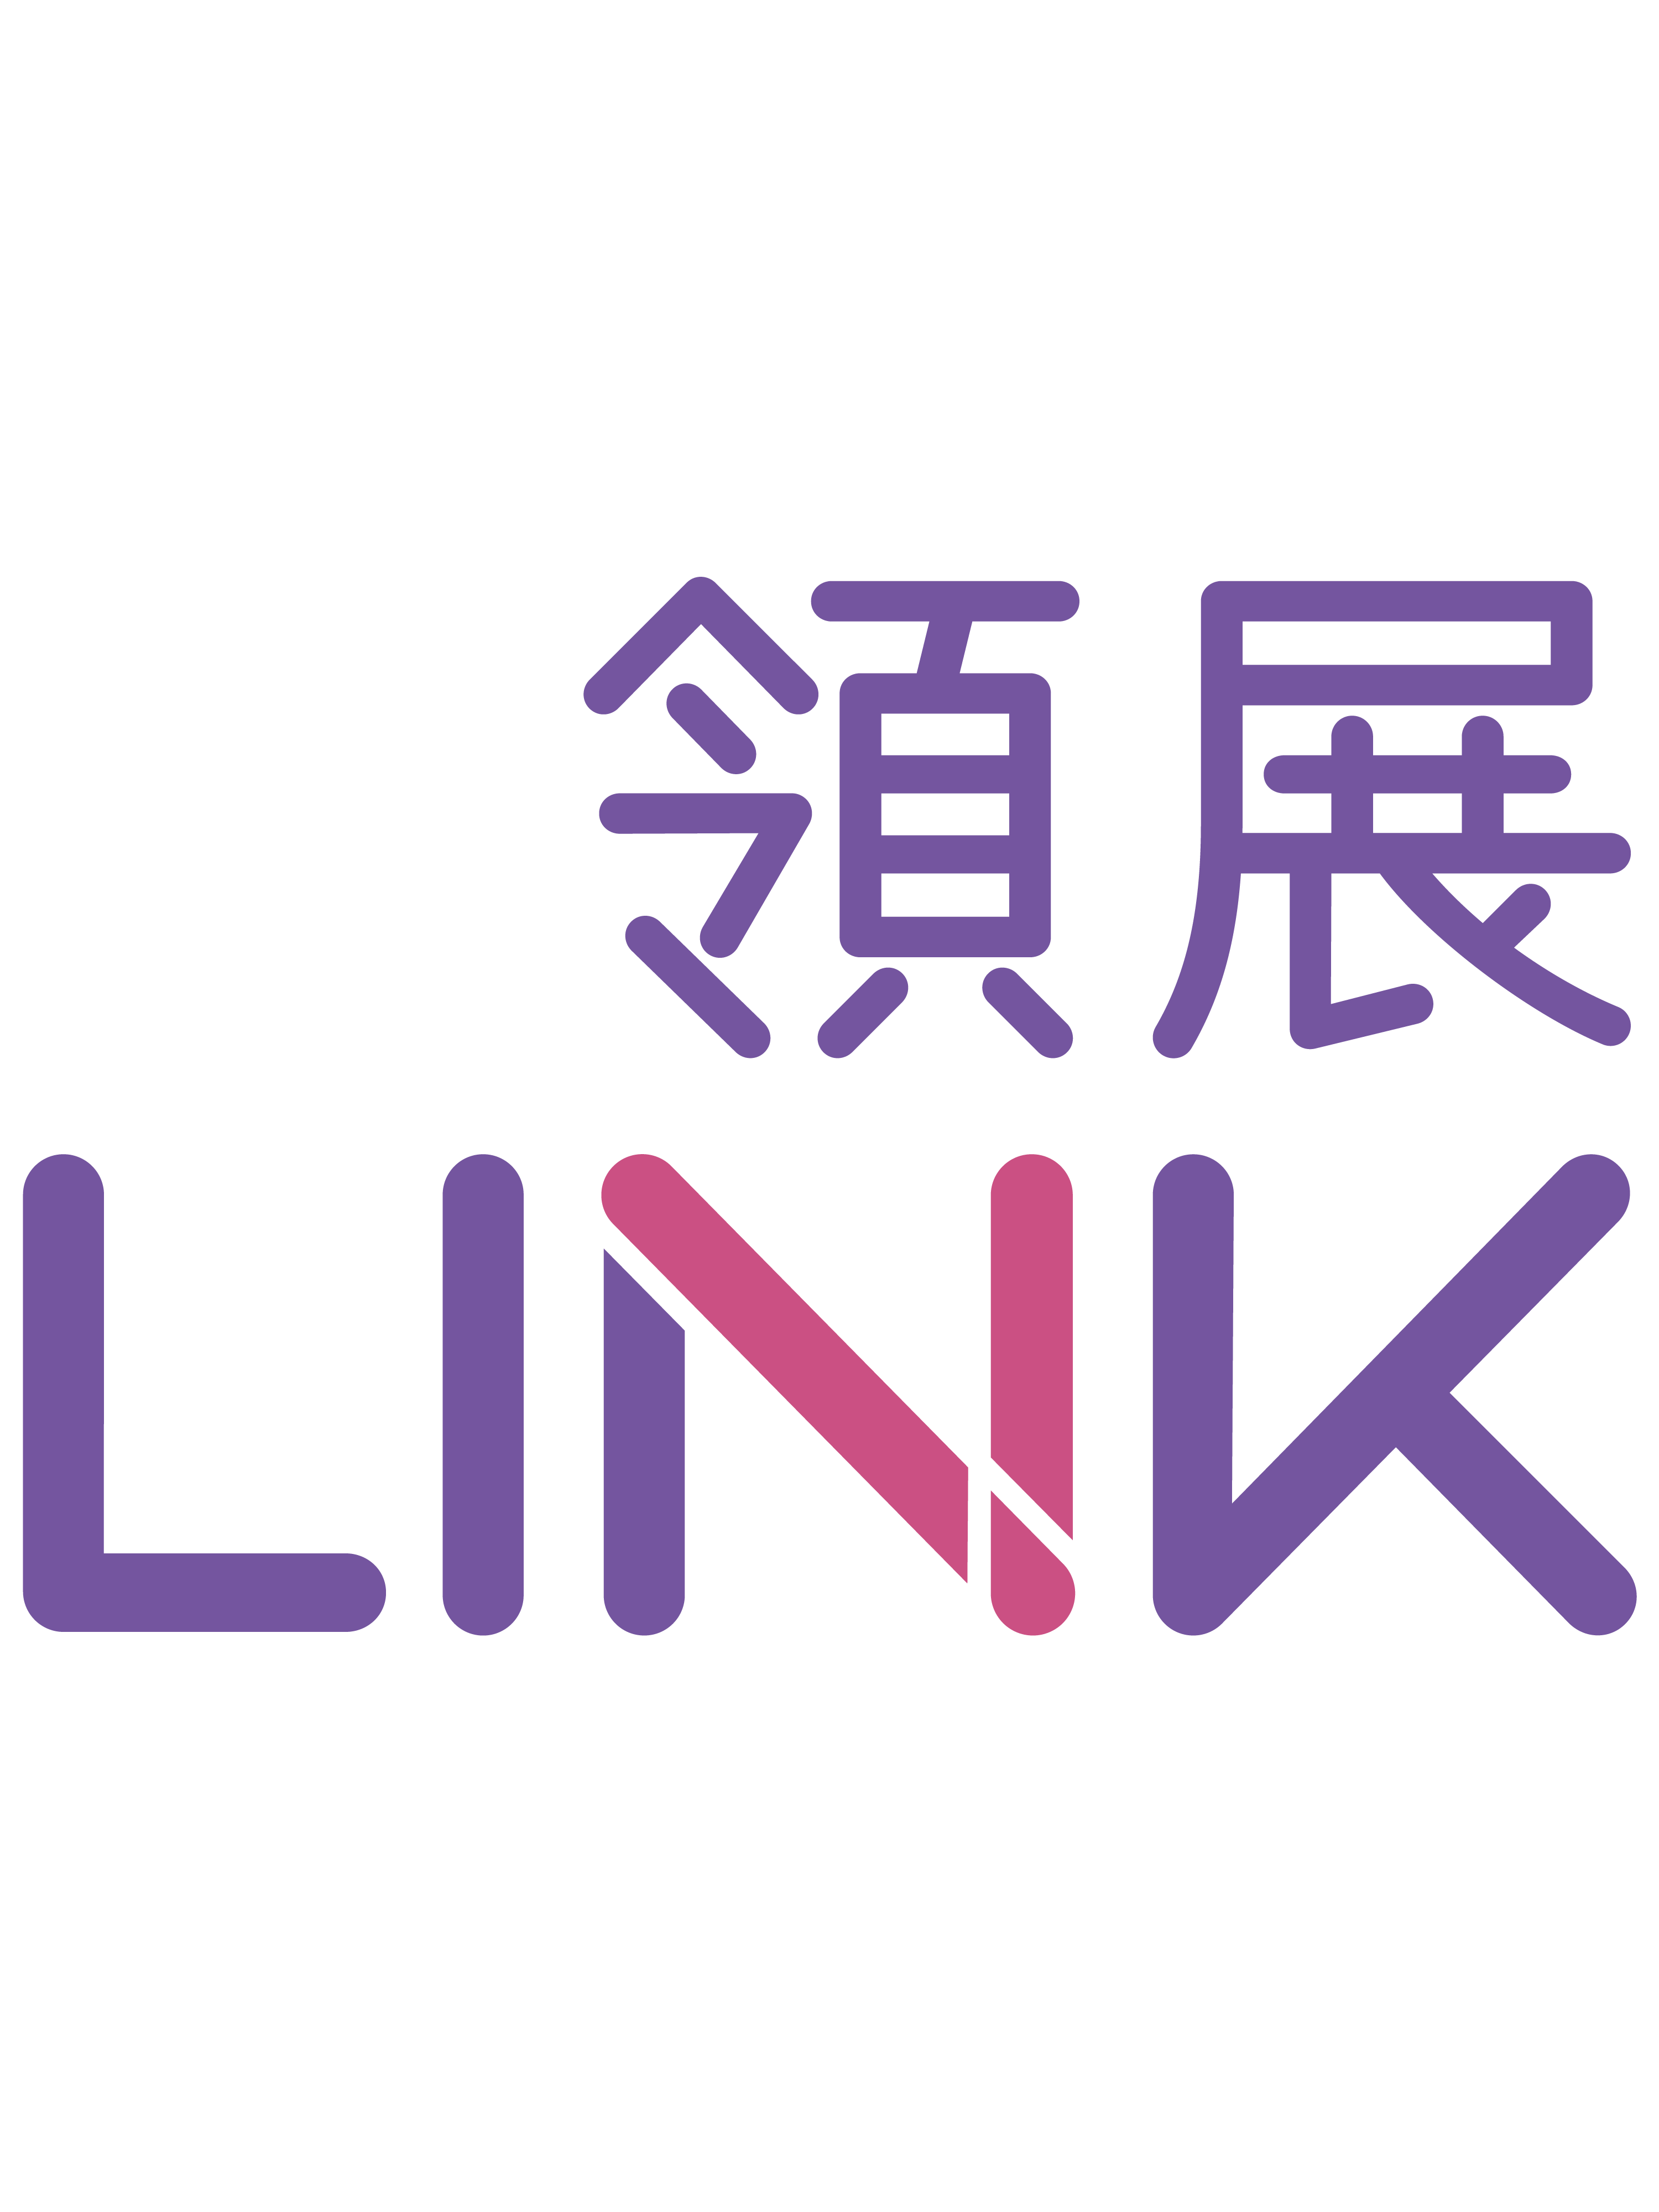 Link Logo - File:Link-logo-2015.png - Wikimedia Commons